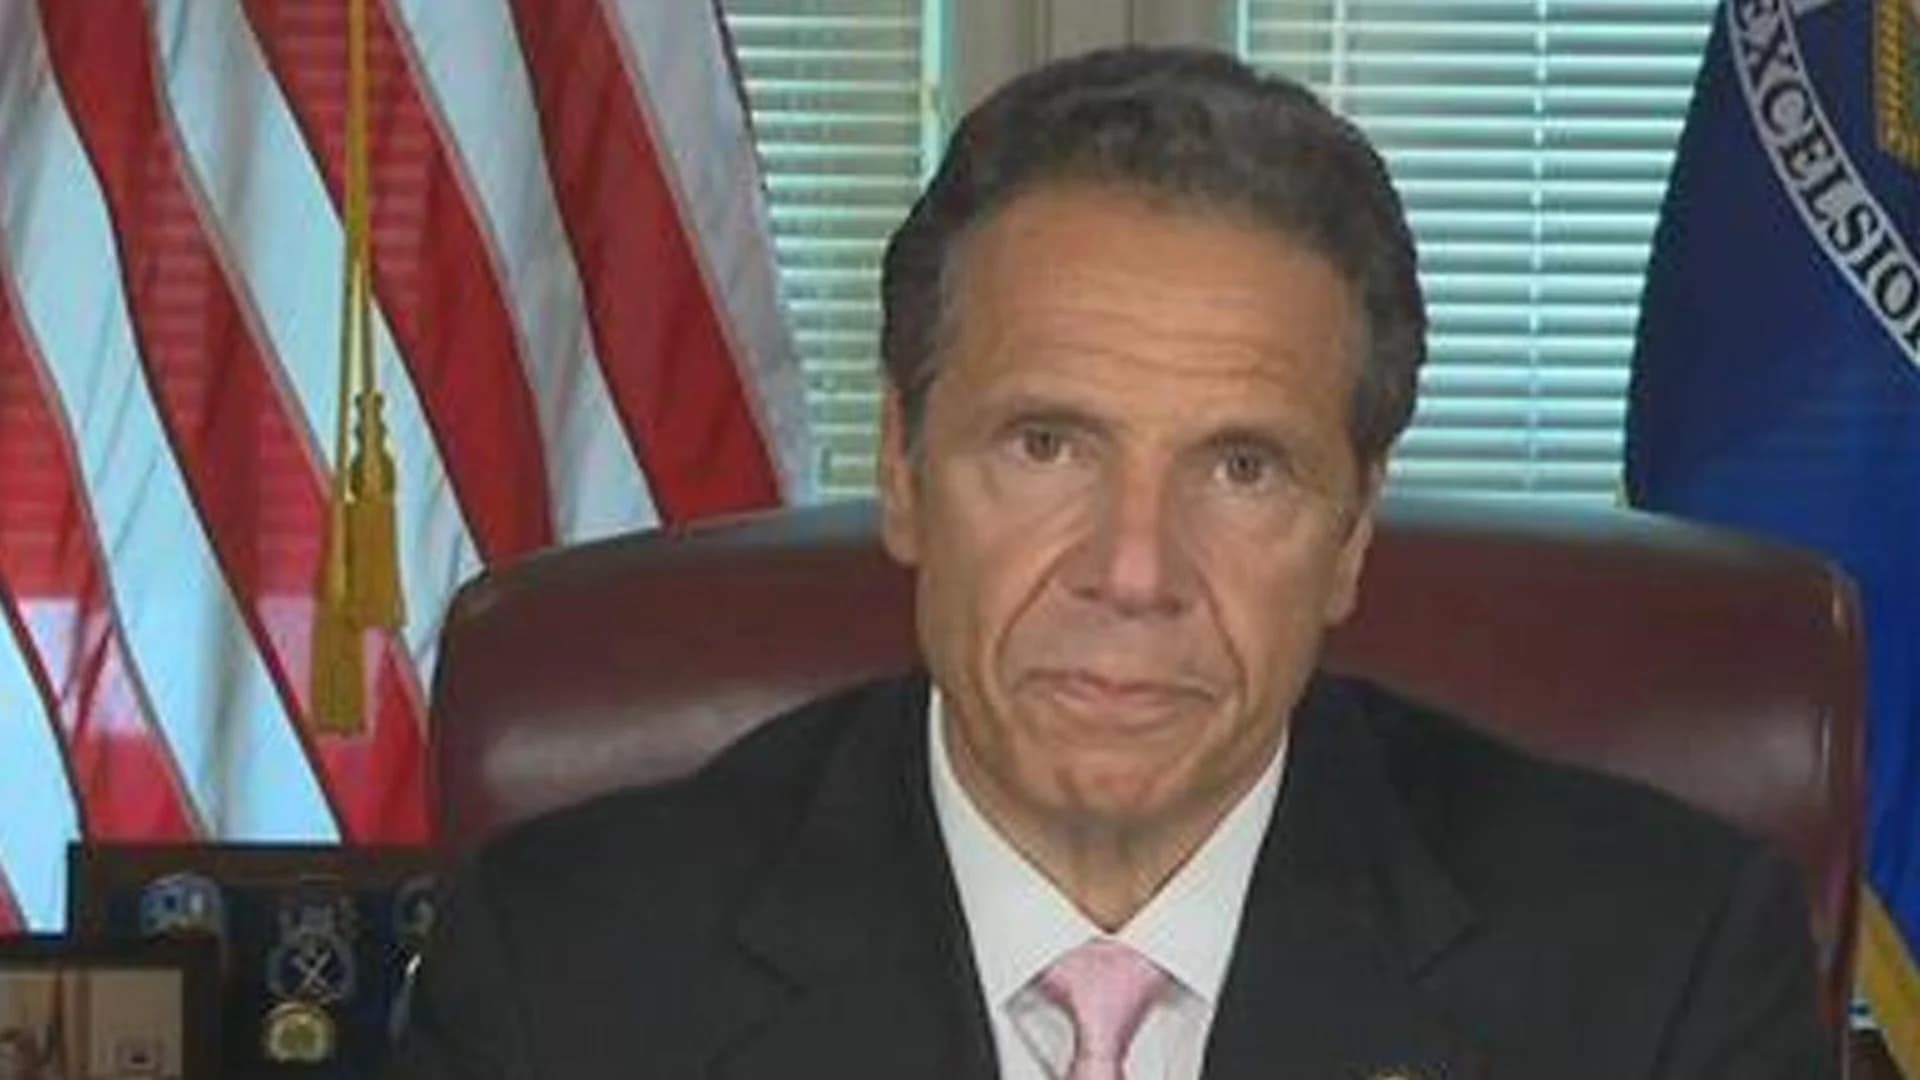 ‘Let’s lead the way.’ Cuomo gives final daily COVID-19 briefing